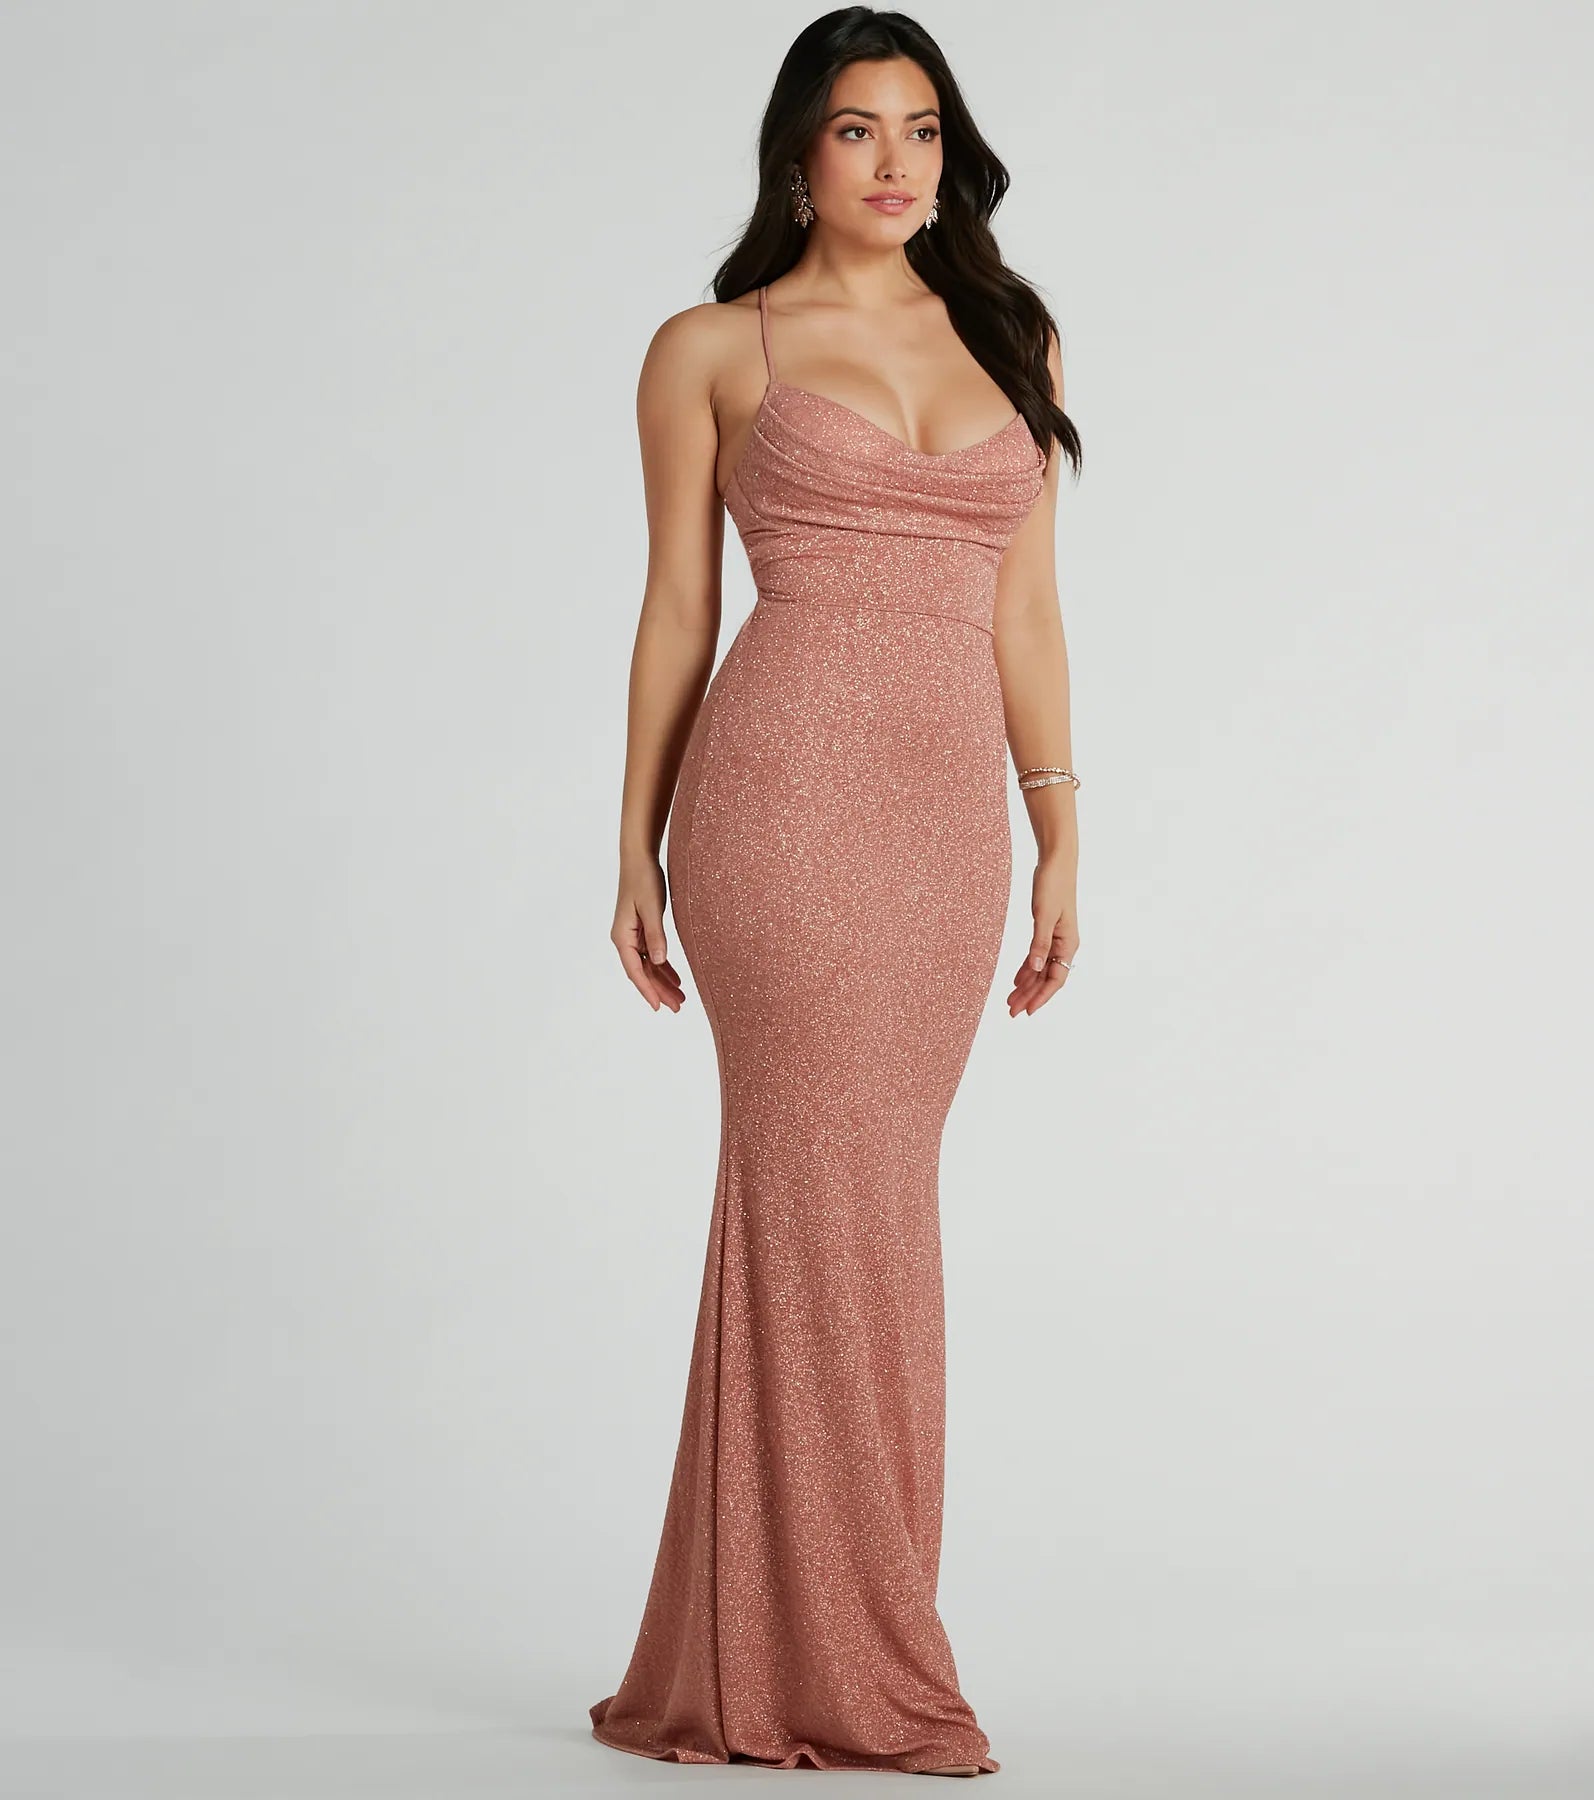 Sophisticated Floor Length Knit Cowl Neck Spaghetti Strap Glittering Stretchy Lace-Up Mermaid Prom Dress/Party Dress